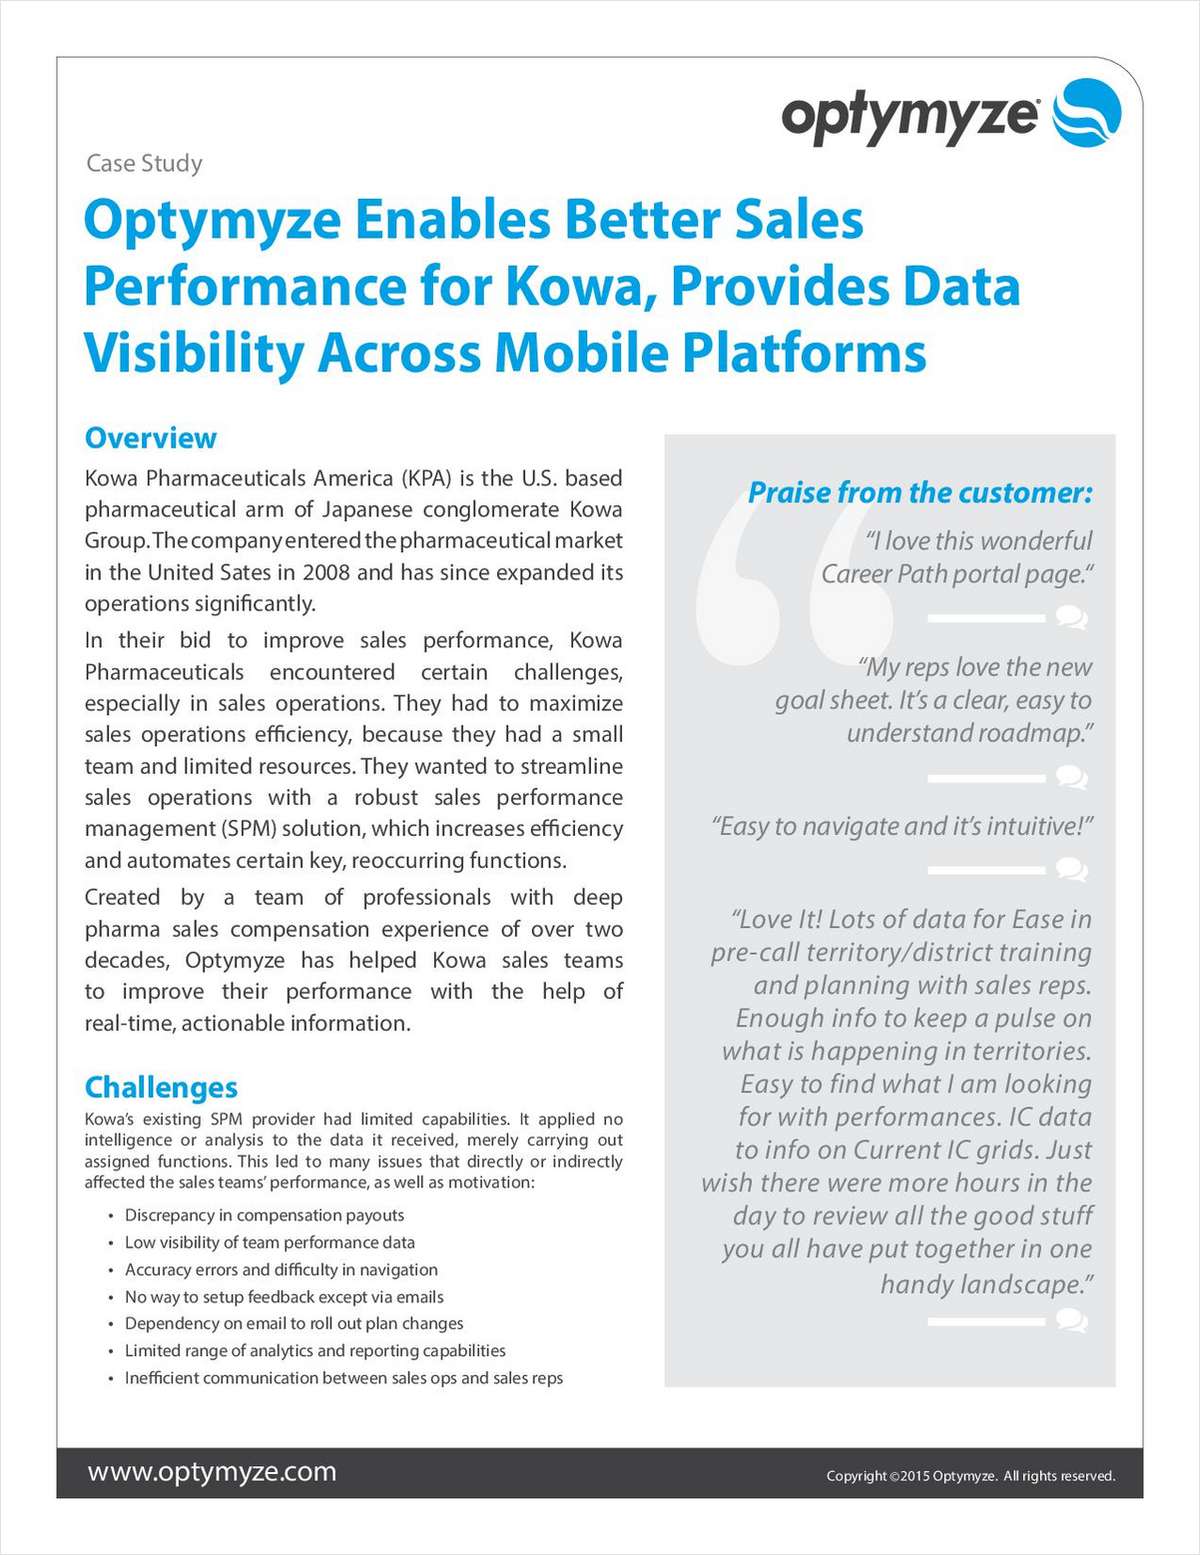 Optymyze Enables Better Sales Performance for Kowa, Provides Data Visibility Across Mobile Platforms